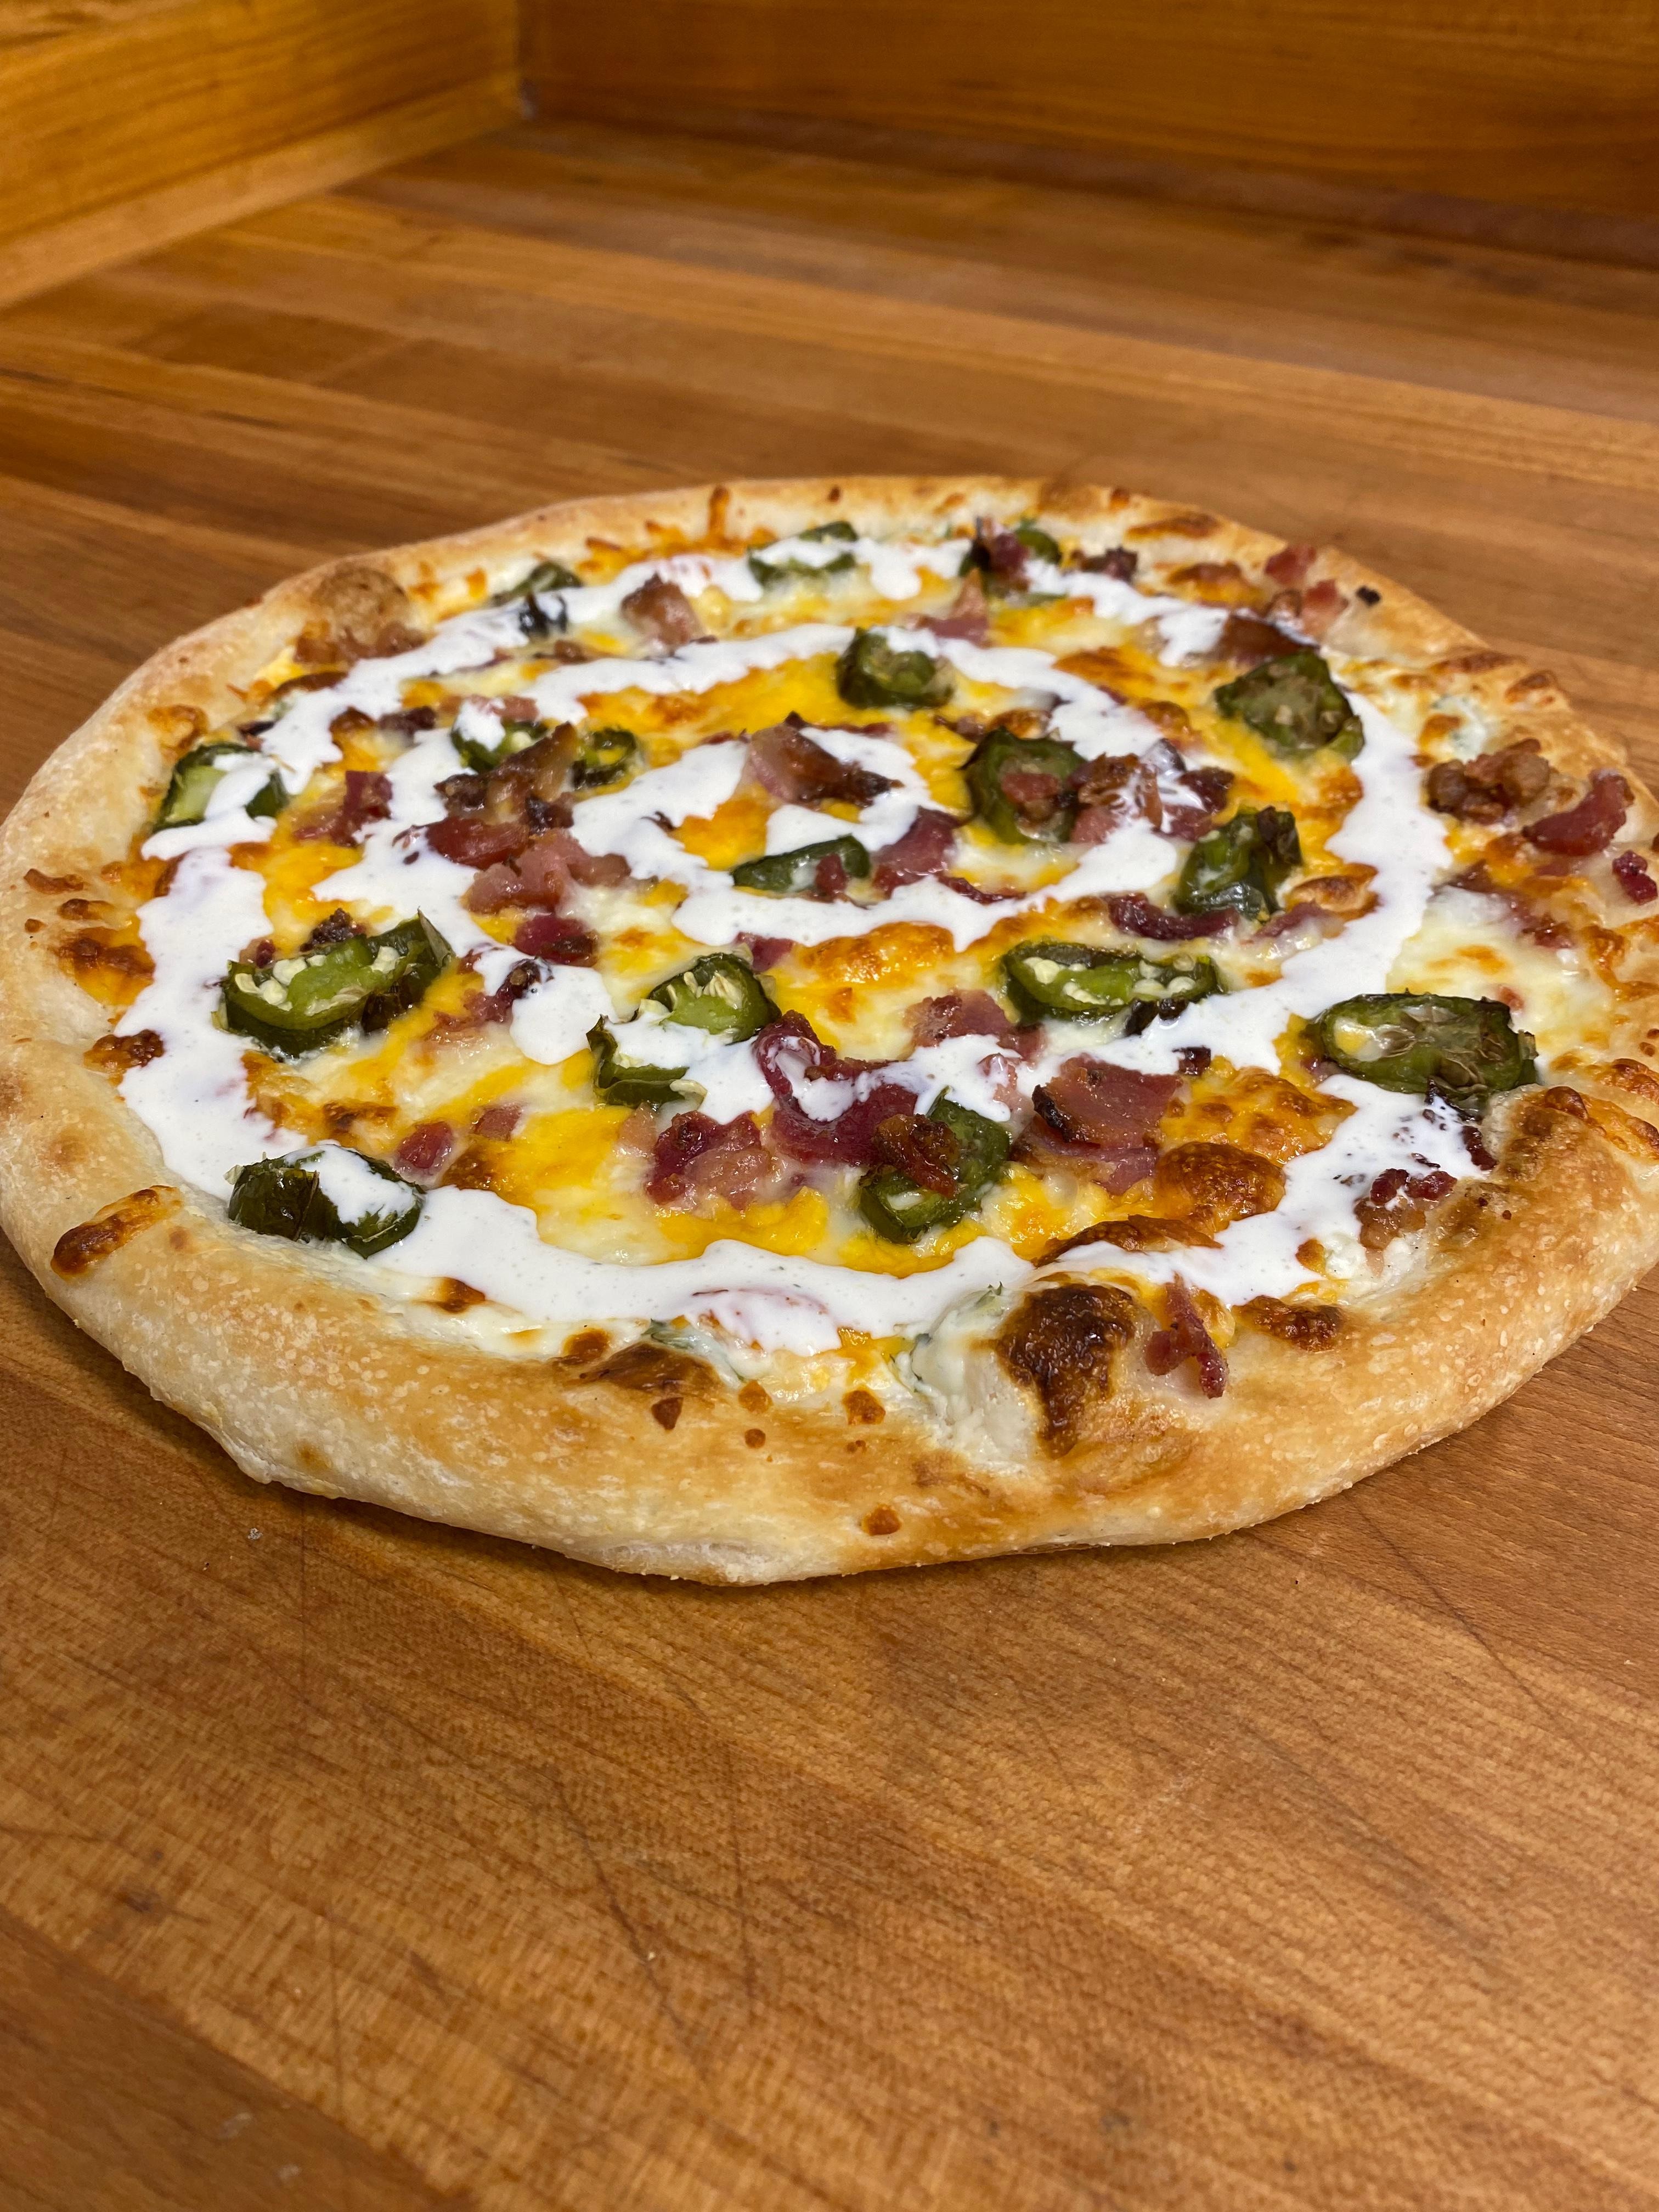 Jalapeno Popper Pizza (Limited Time Only)